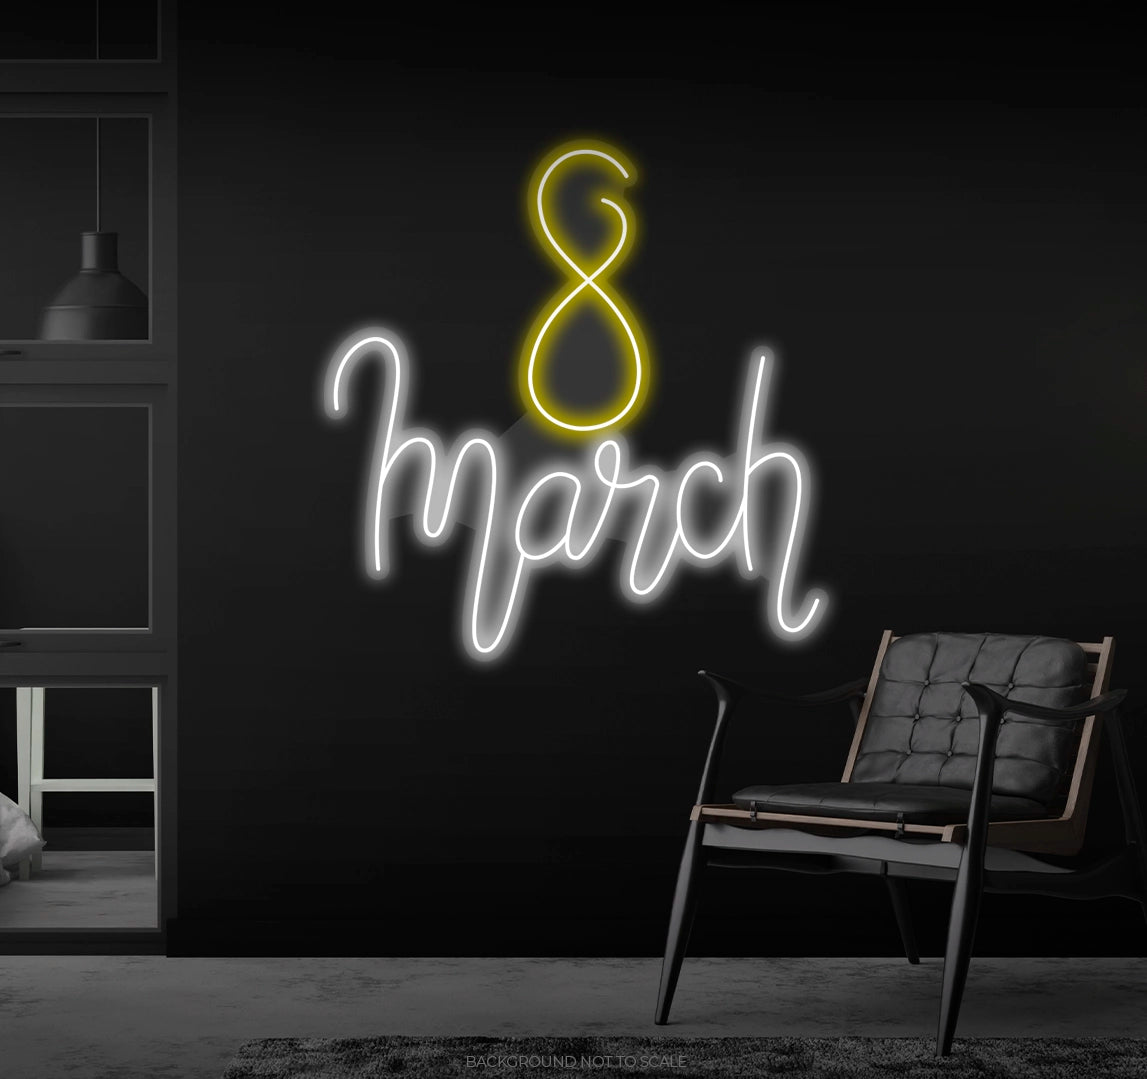 8 march handwriting LED neon